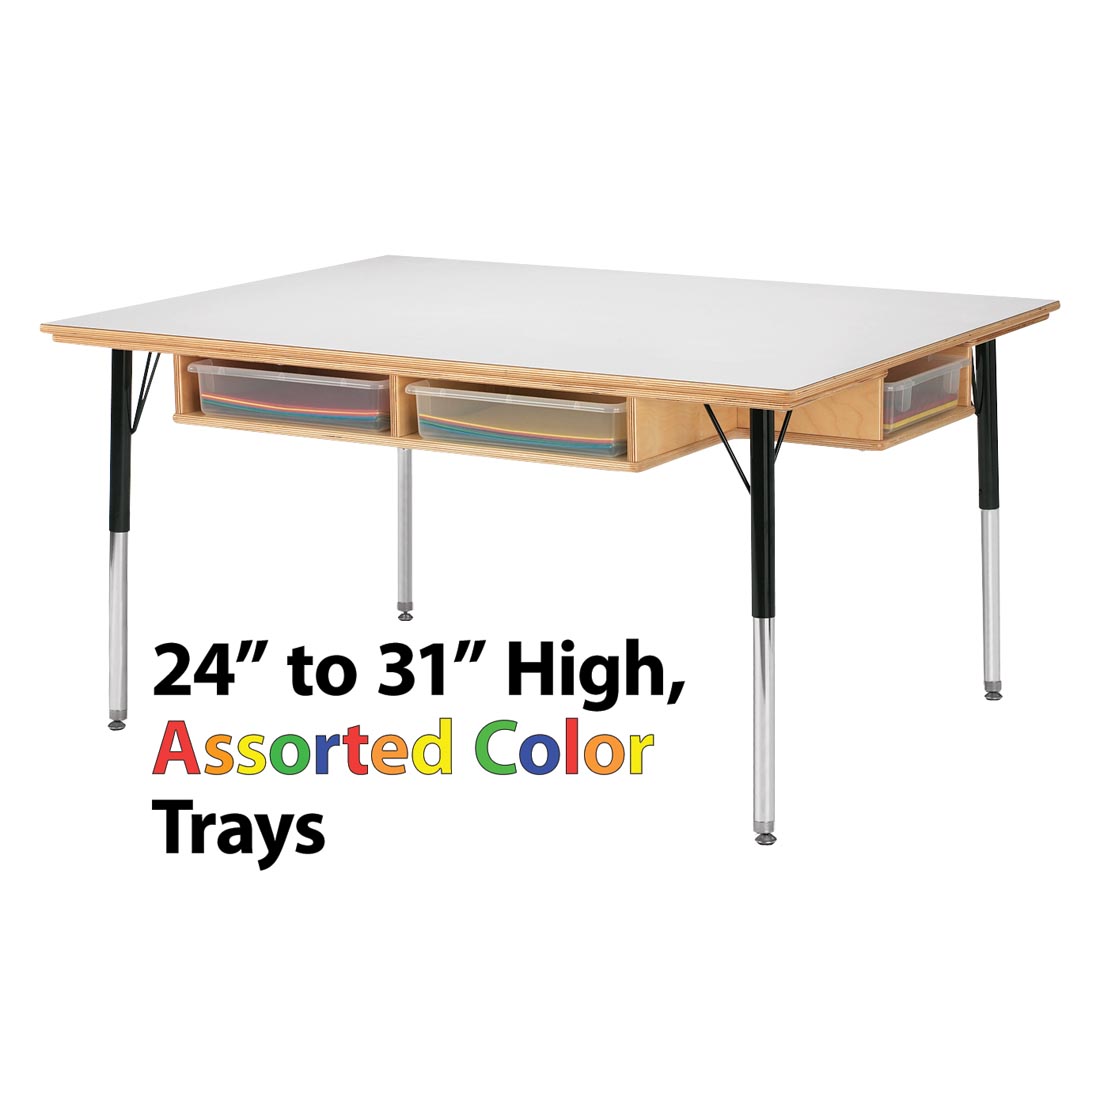 Table With Storage Trays with the text 24" to 31" High, Assorted Color Trays